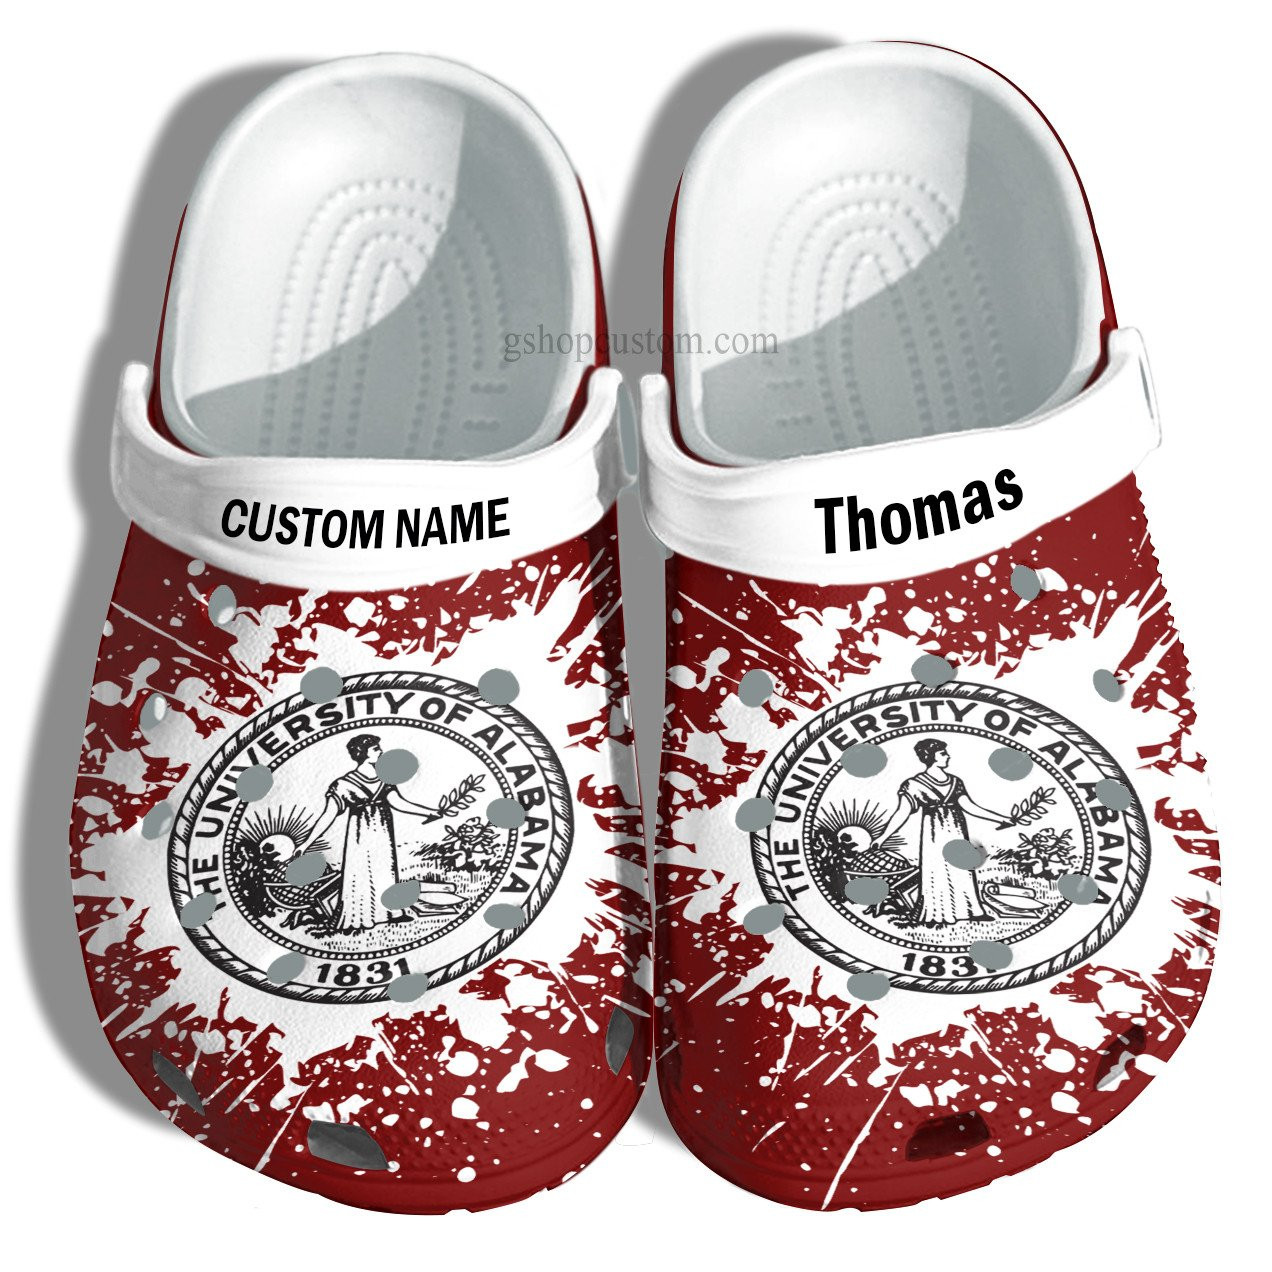 The University Of Alabama Graduation Gifts Croc Shoes Customize- Admission Gift Crocs Shoes